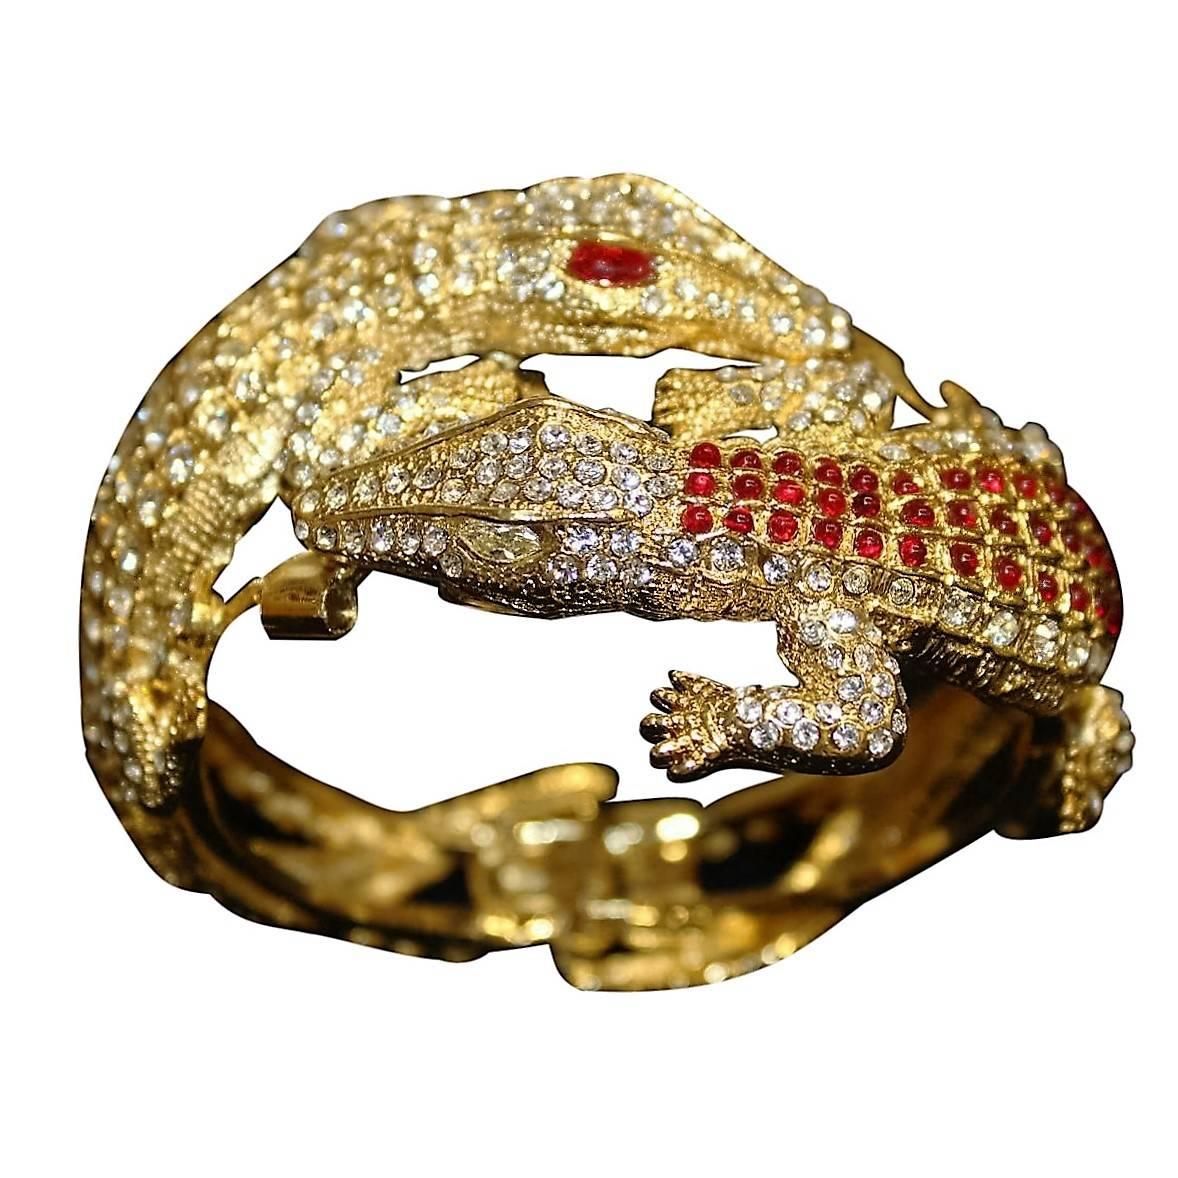 Masterpiece by Carlo Zini bijoux Milano
One of the world greatest costume jewellers
Non allergenic rhodium, gold dipped
Theme : gecko's couple
Amazing hand creation of colored crystals 
Total width cm 6 (2.36 inches)
17 cm wrist circumference